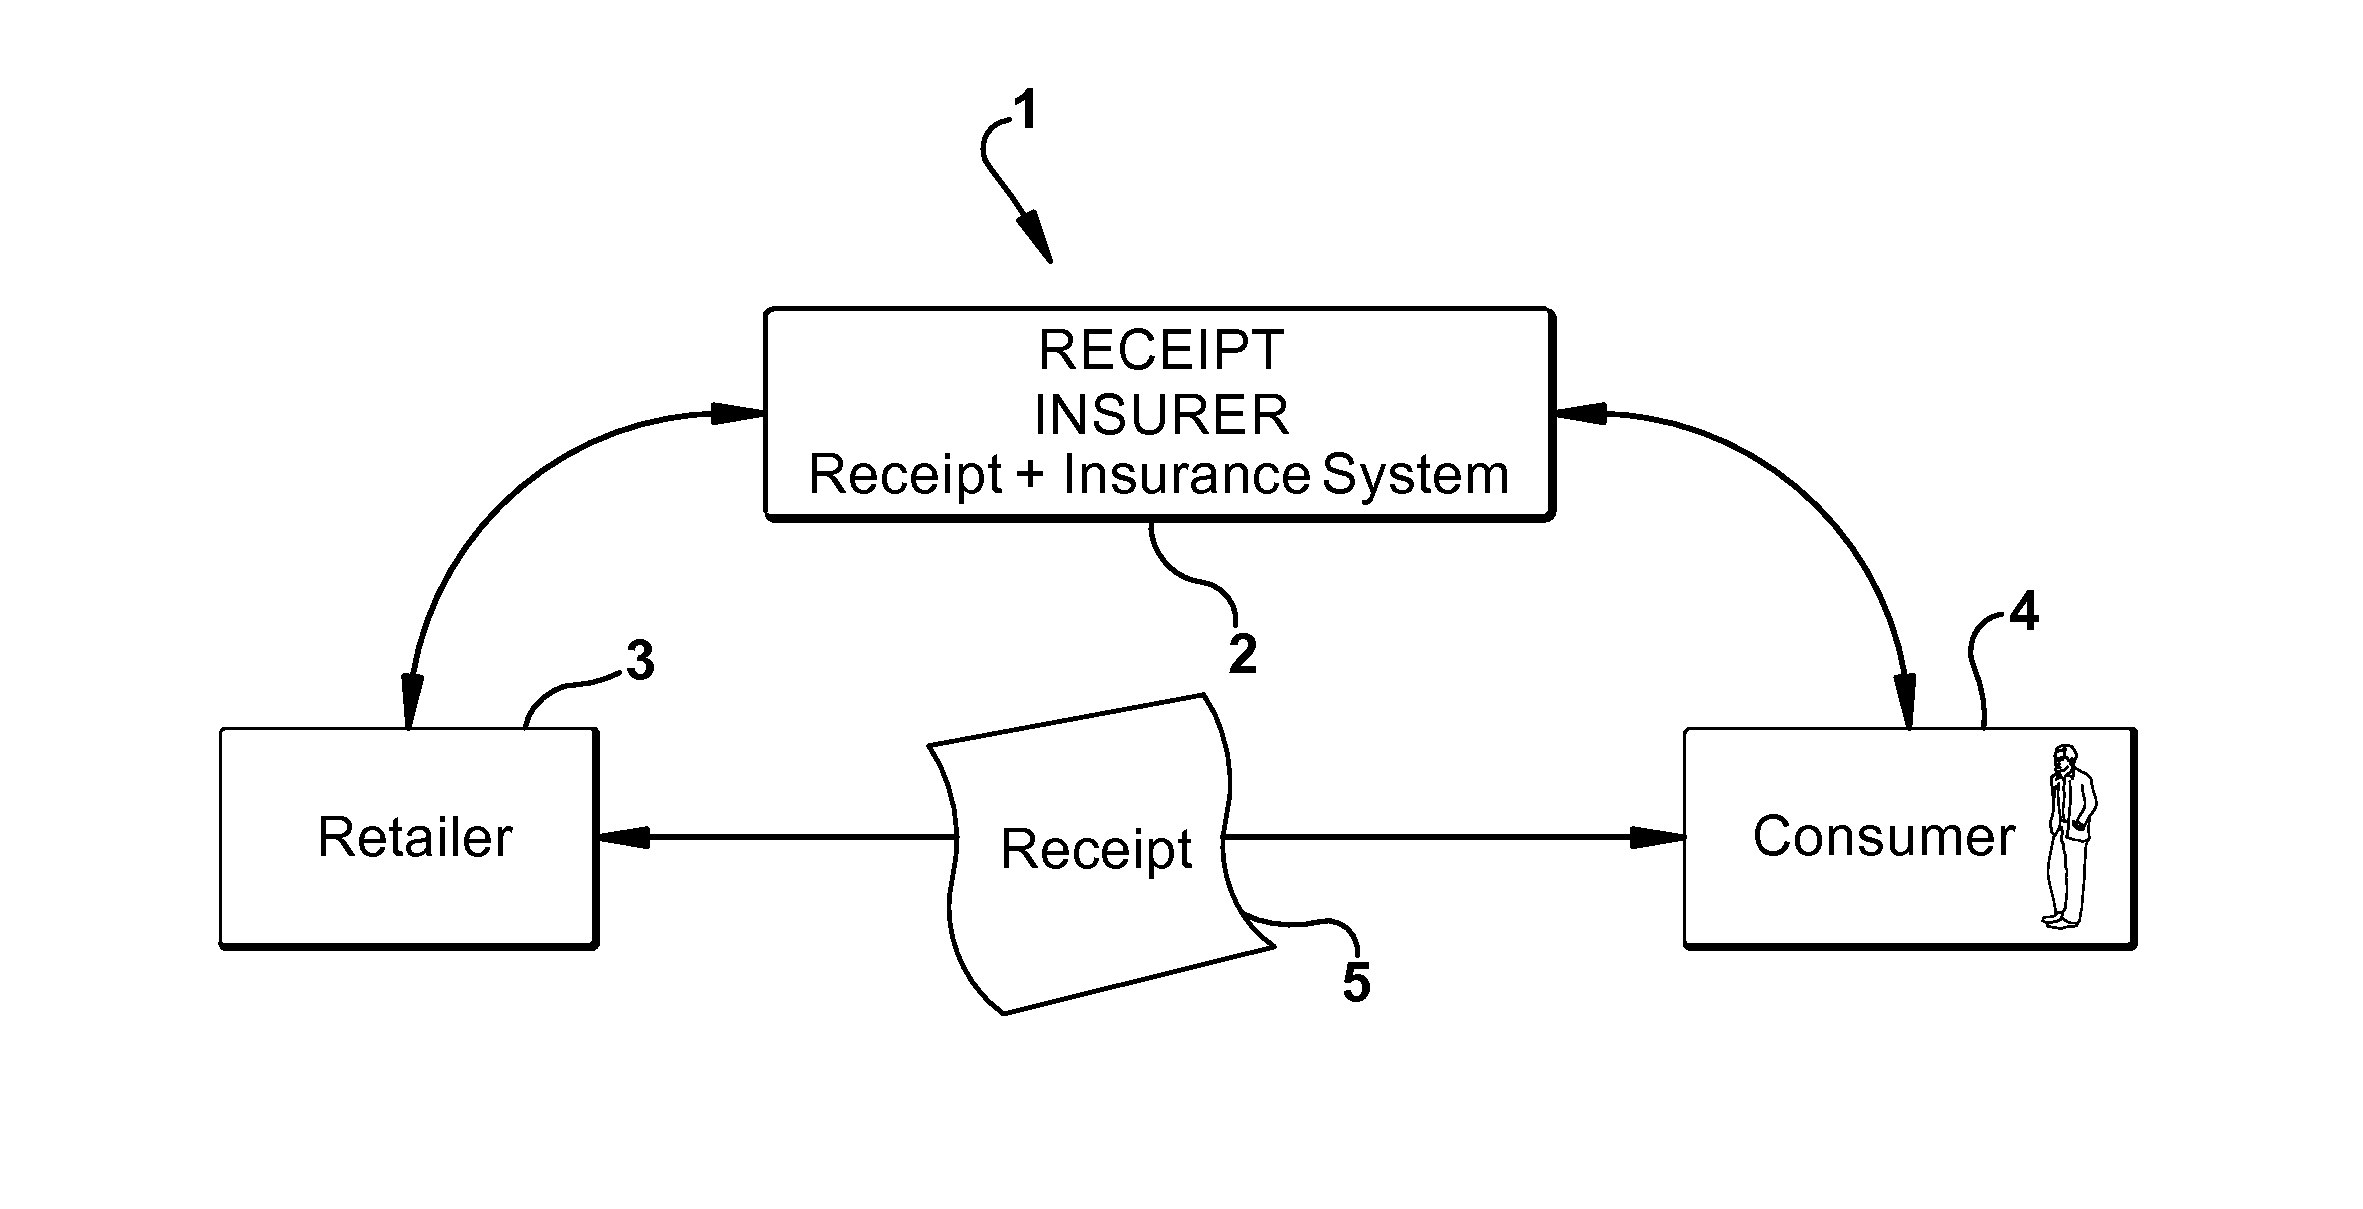 Receipt insurance systems and methods